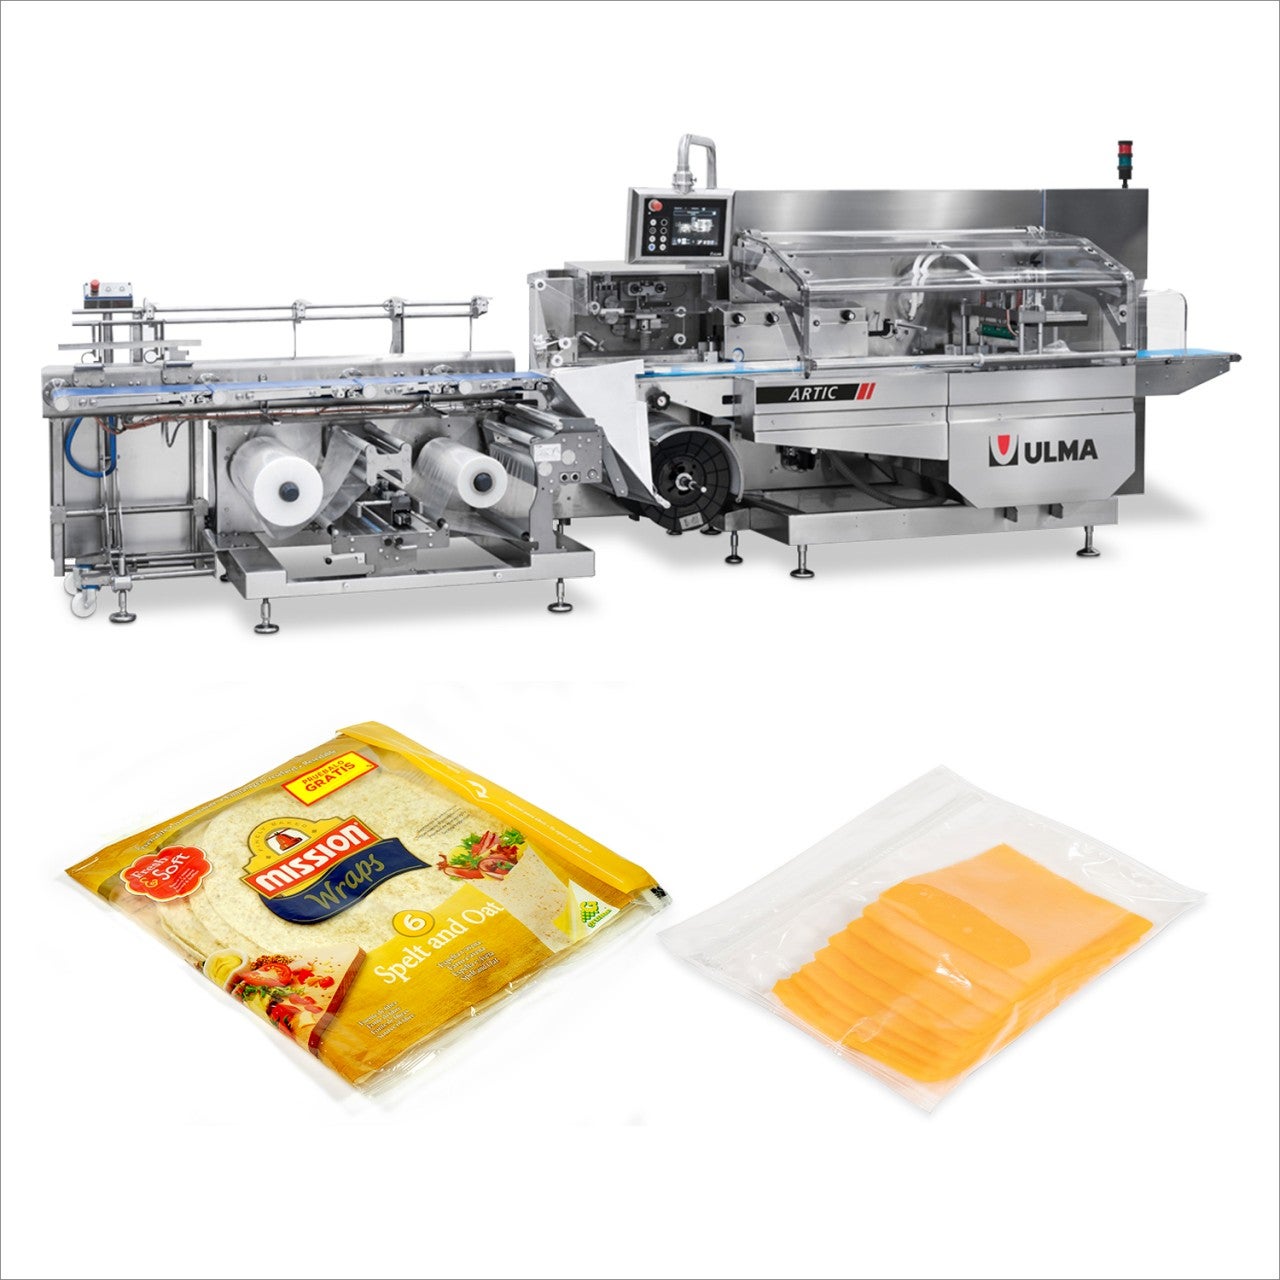 Harpak-ULMA launches packaging system with side-seal features